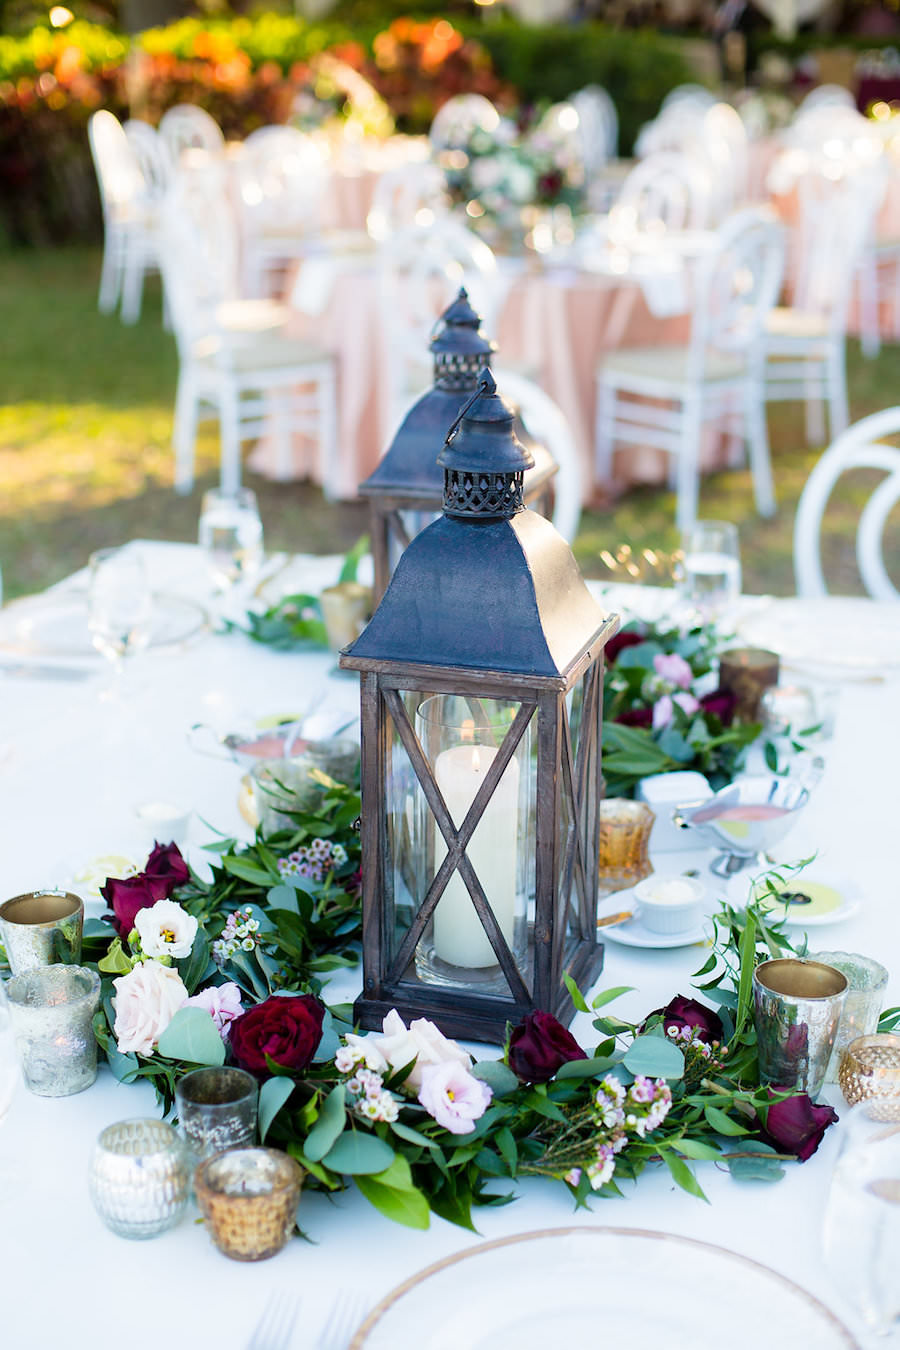 Rustic Wedding Centerpiece with Lantern and Candle Surrounded by Wreath of Ivory and Merlot Roses and Greenery | Tampa Wedding Photographer Kera Photography